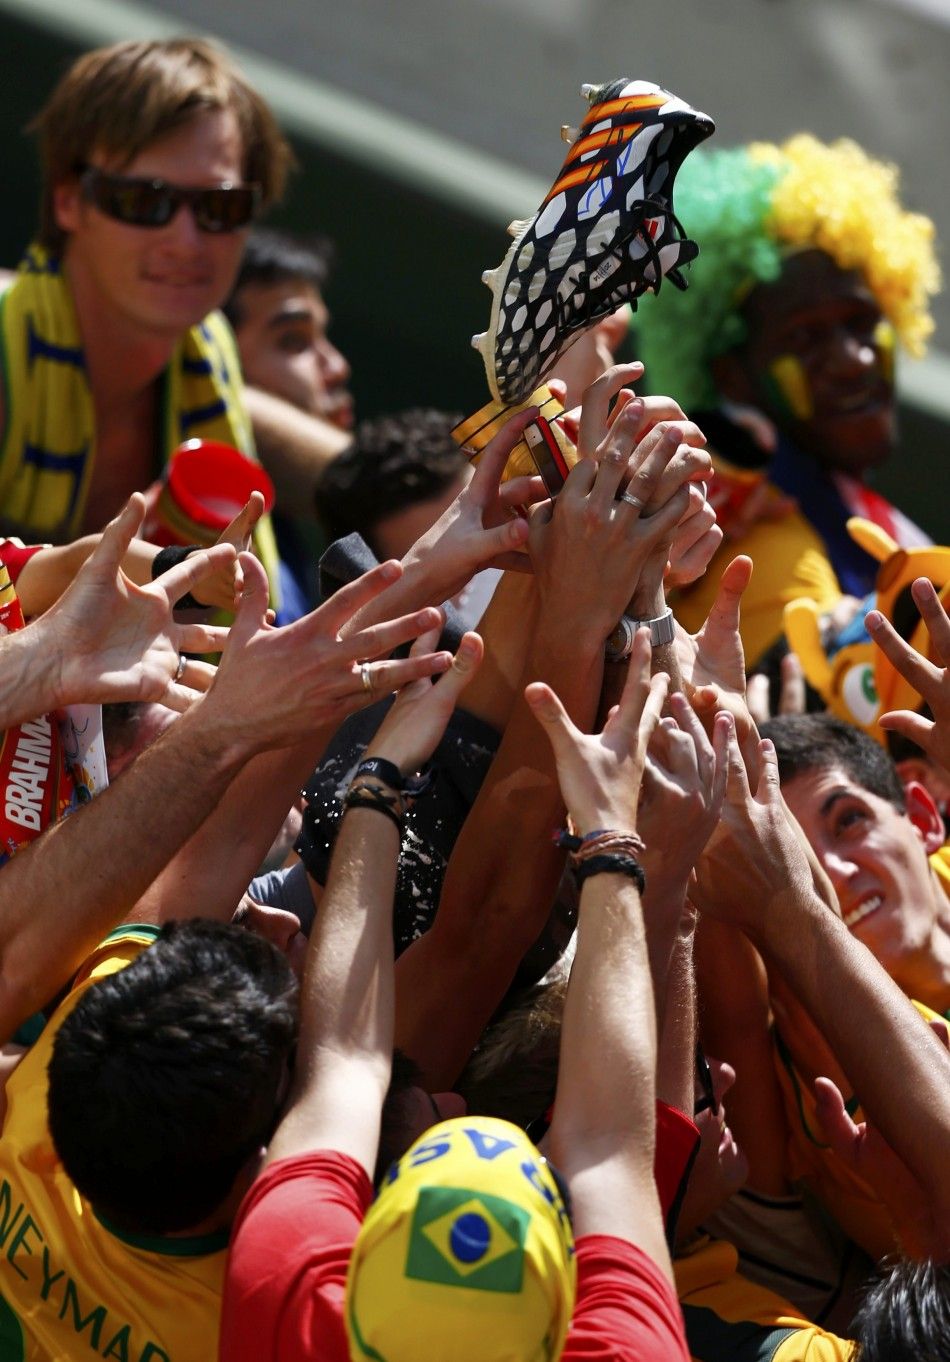 Fans try to grab a boot thrown to them by Spains goalkeeper Iker Casillas